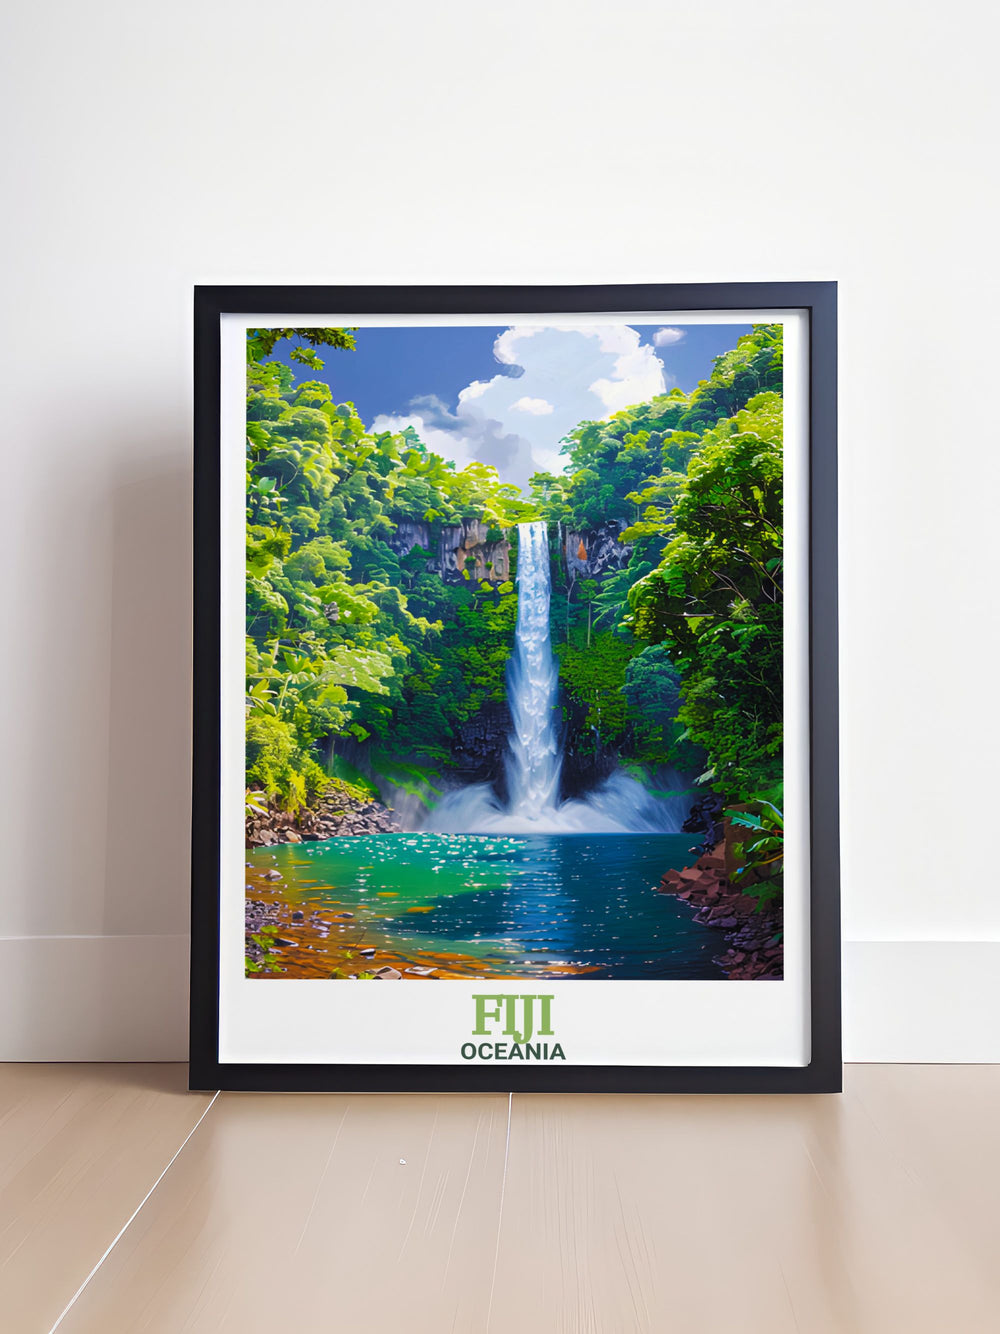 Stunning Fiji wall art featuring Bouma National Heritage Park brings the lush greenery and serene waterfalls of Fiji into your home decor. This Fiji photo captures the natural beauty and tranquility of Bouma National Heritage Park.